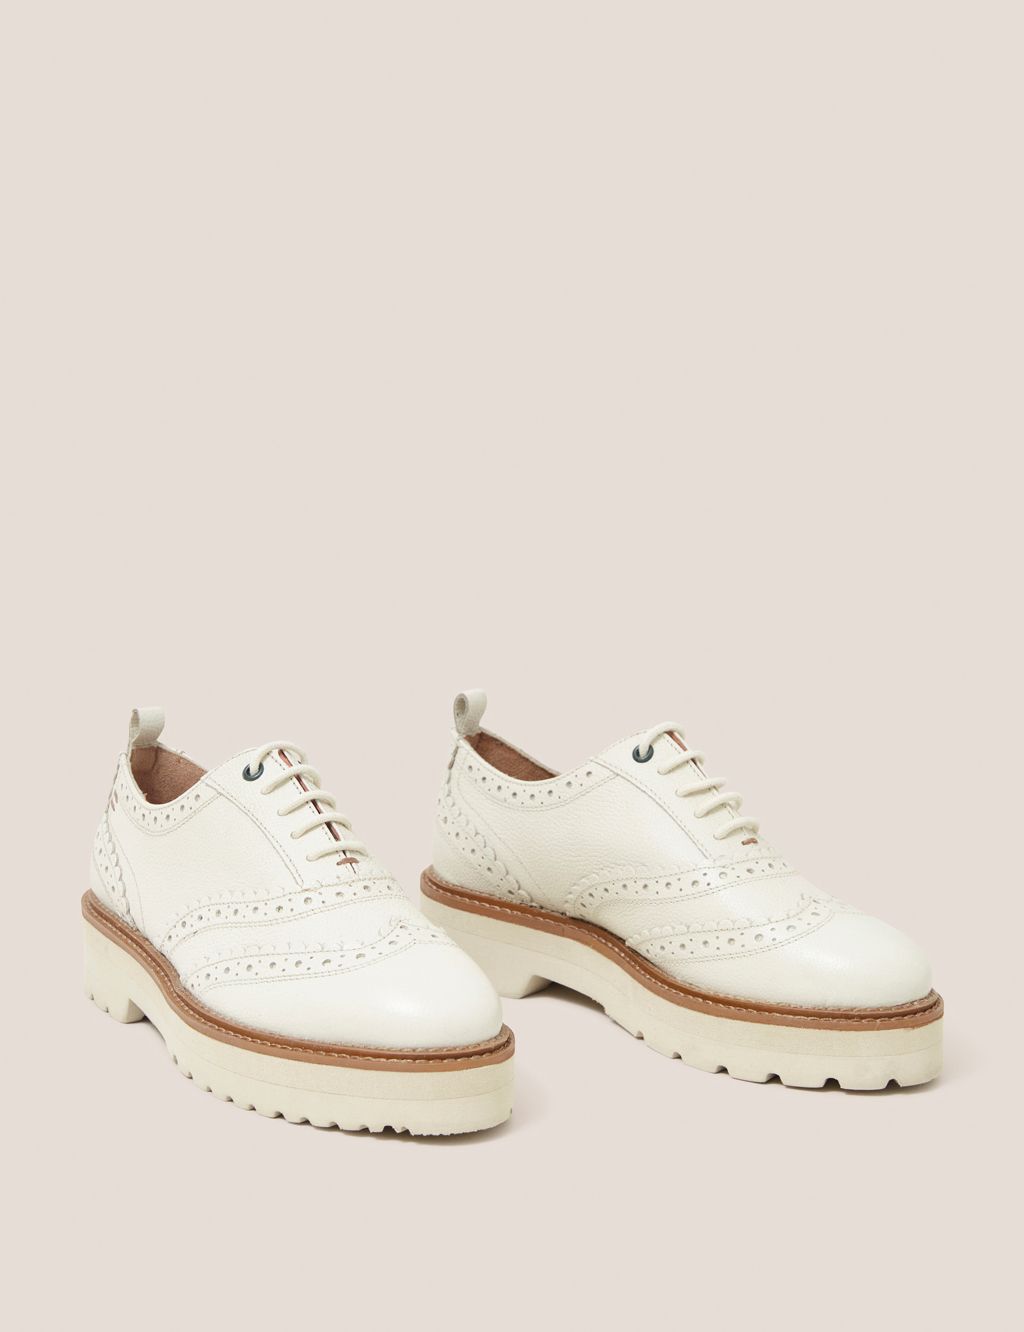 Leather Lace Up Flatform Brogues